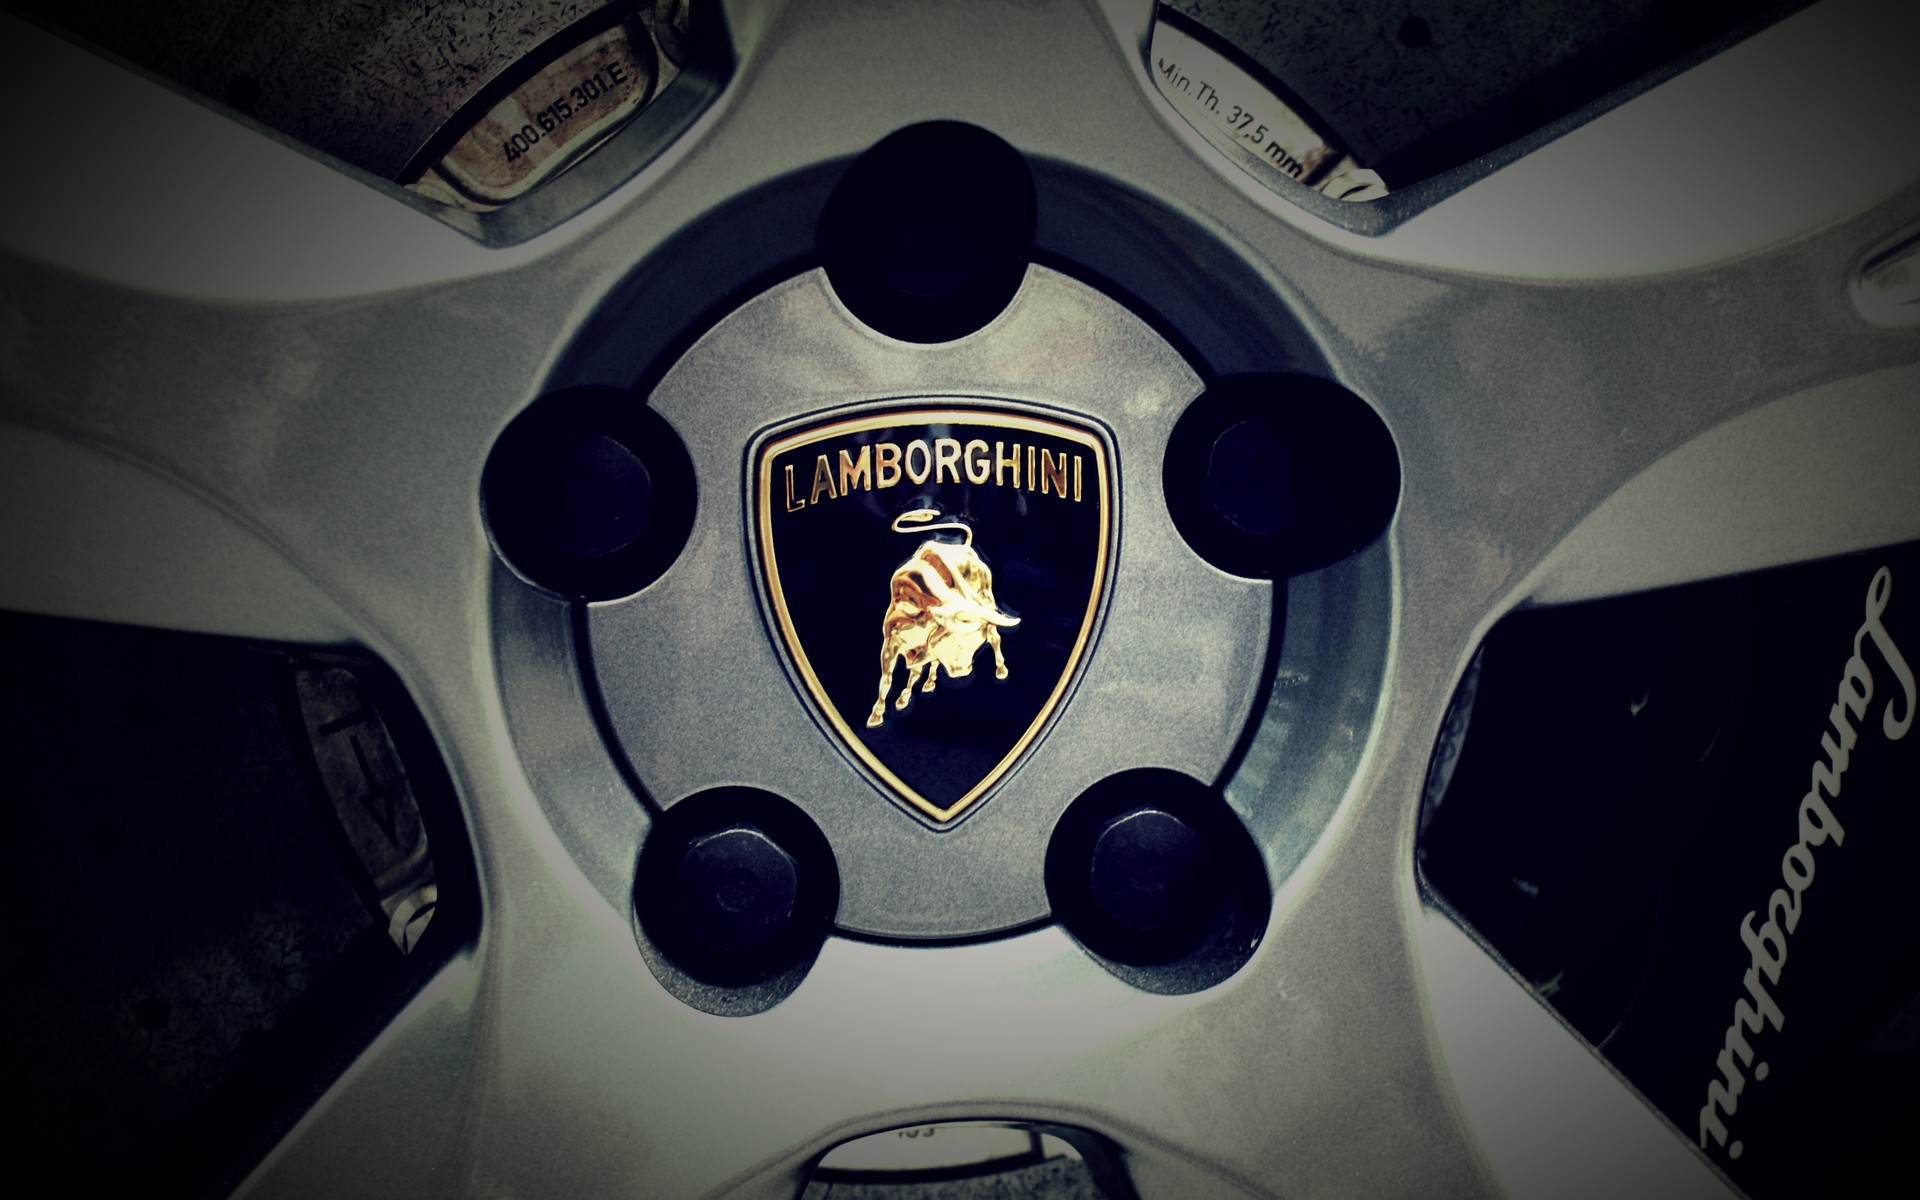 First fully electric Lamborghini coming by 2030, automaker says - UPI.com